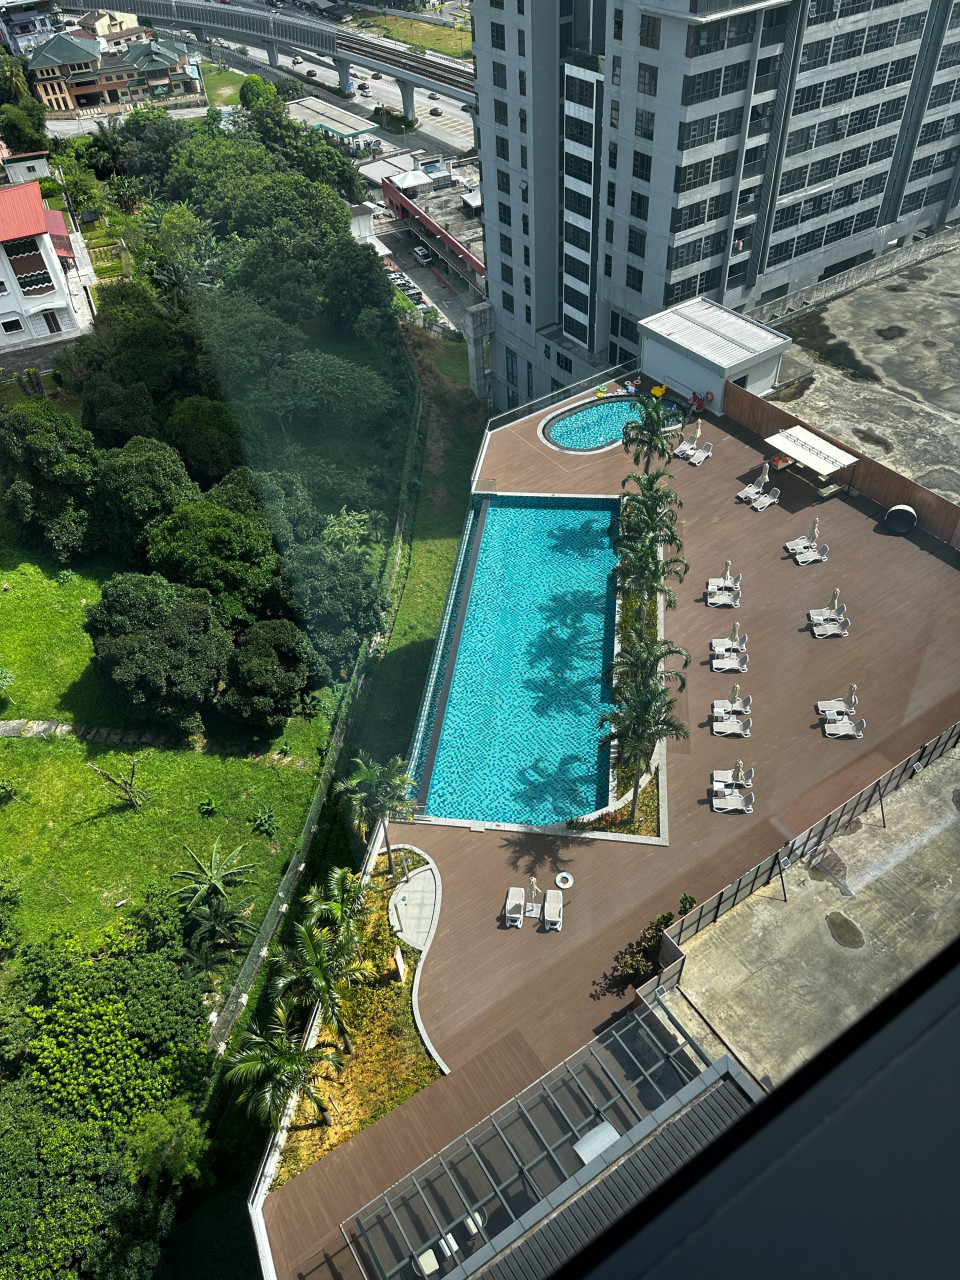 A view from above of the swimming area with two pools and plenty of deck space to stretch out. – Haikal Fernandez pic